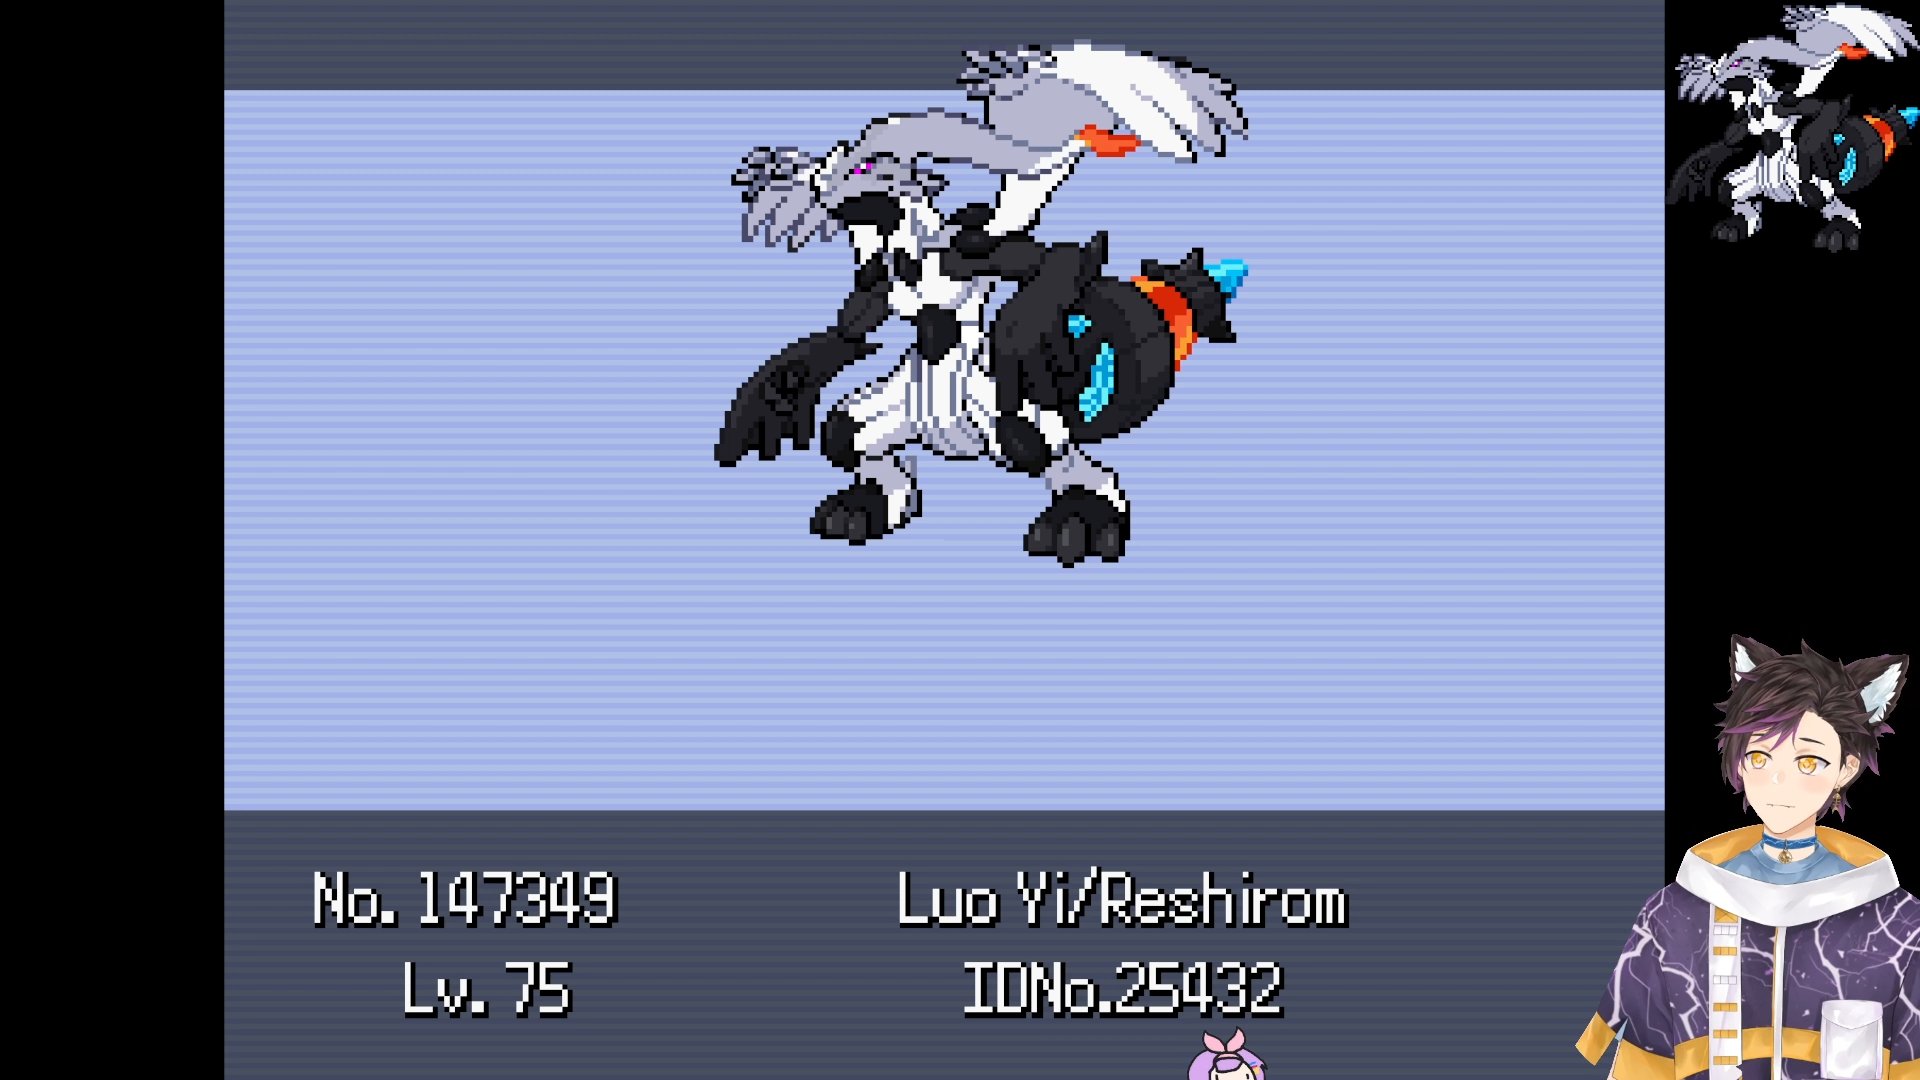 SparksTheNeko  Catboy Enthusiast on X: We completed Pokemon Infinite  Fusion Nuzlocke today! This time for reals with the post game done! Only  one pokemon made it to the end of the